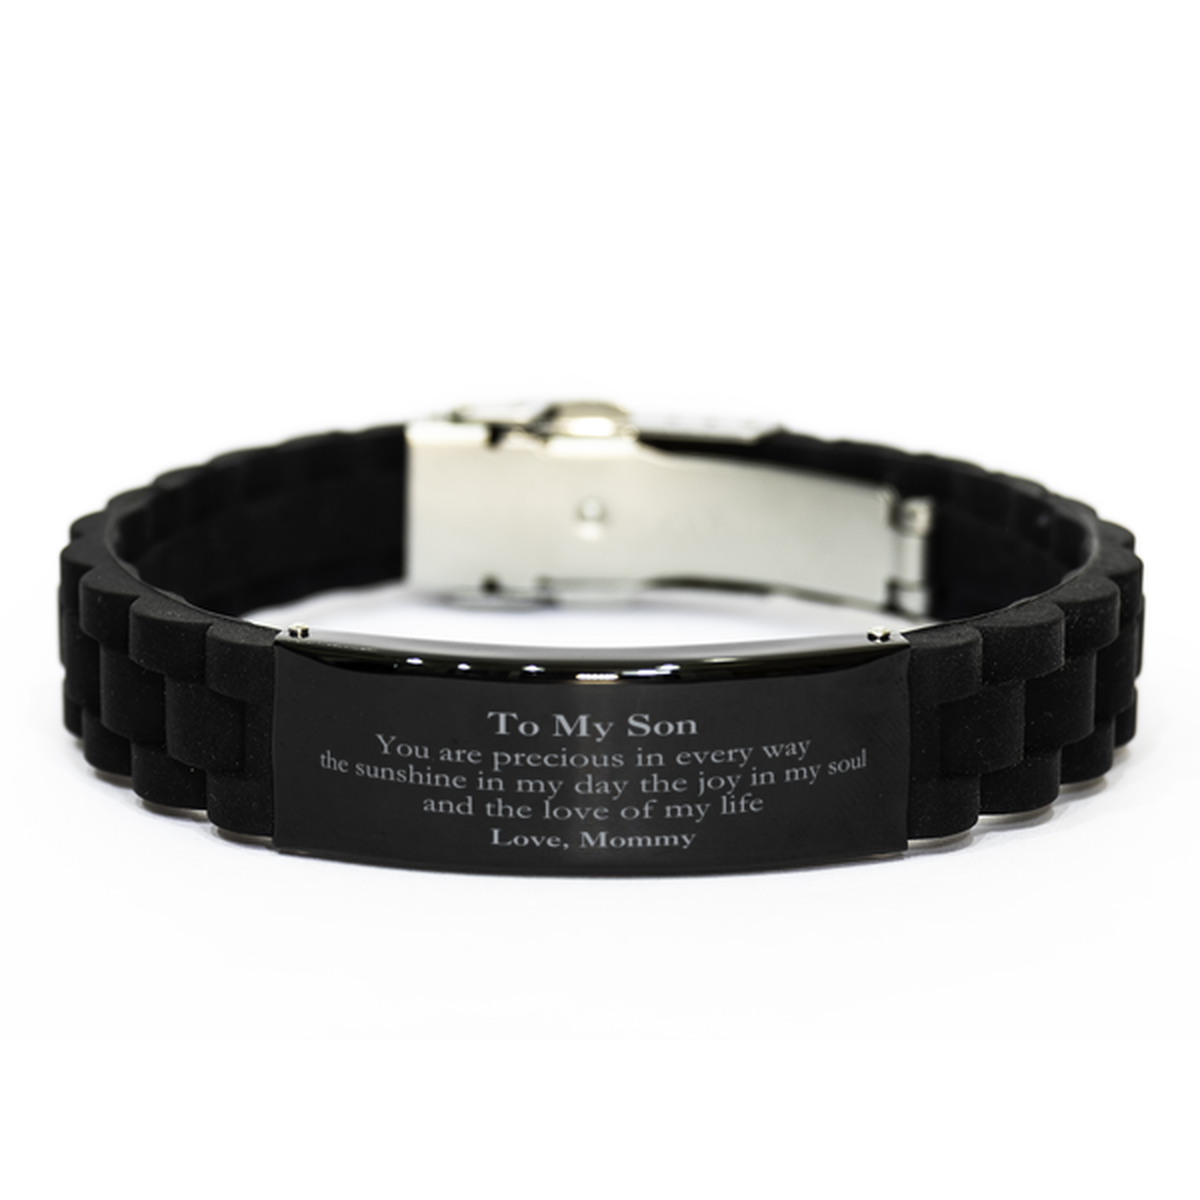 Graduation Gifts for Son Black Glidelock Clasp Bracelet Present from Mommy, Christmas Son Birthday Gifts Son You are precious in every way the sunshine in my day. Love, Mommy